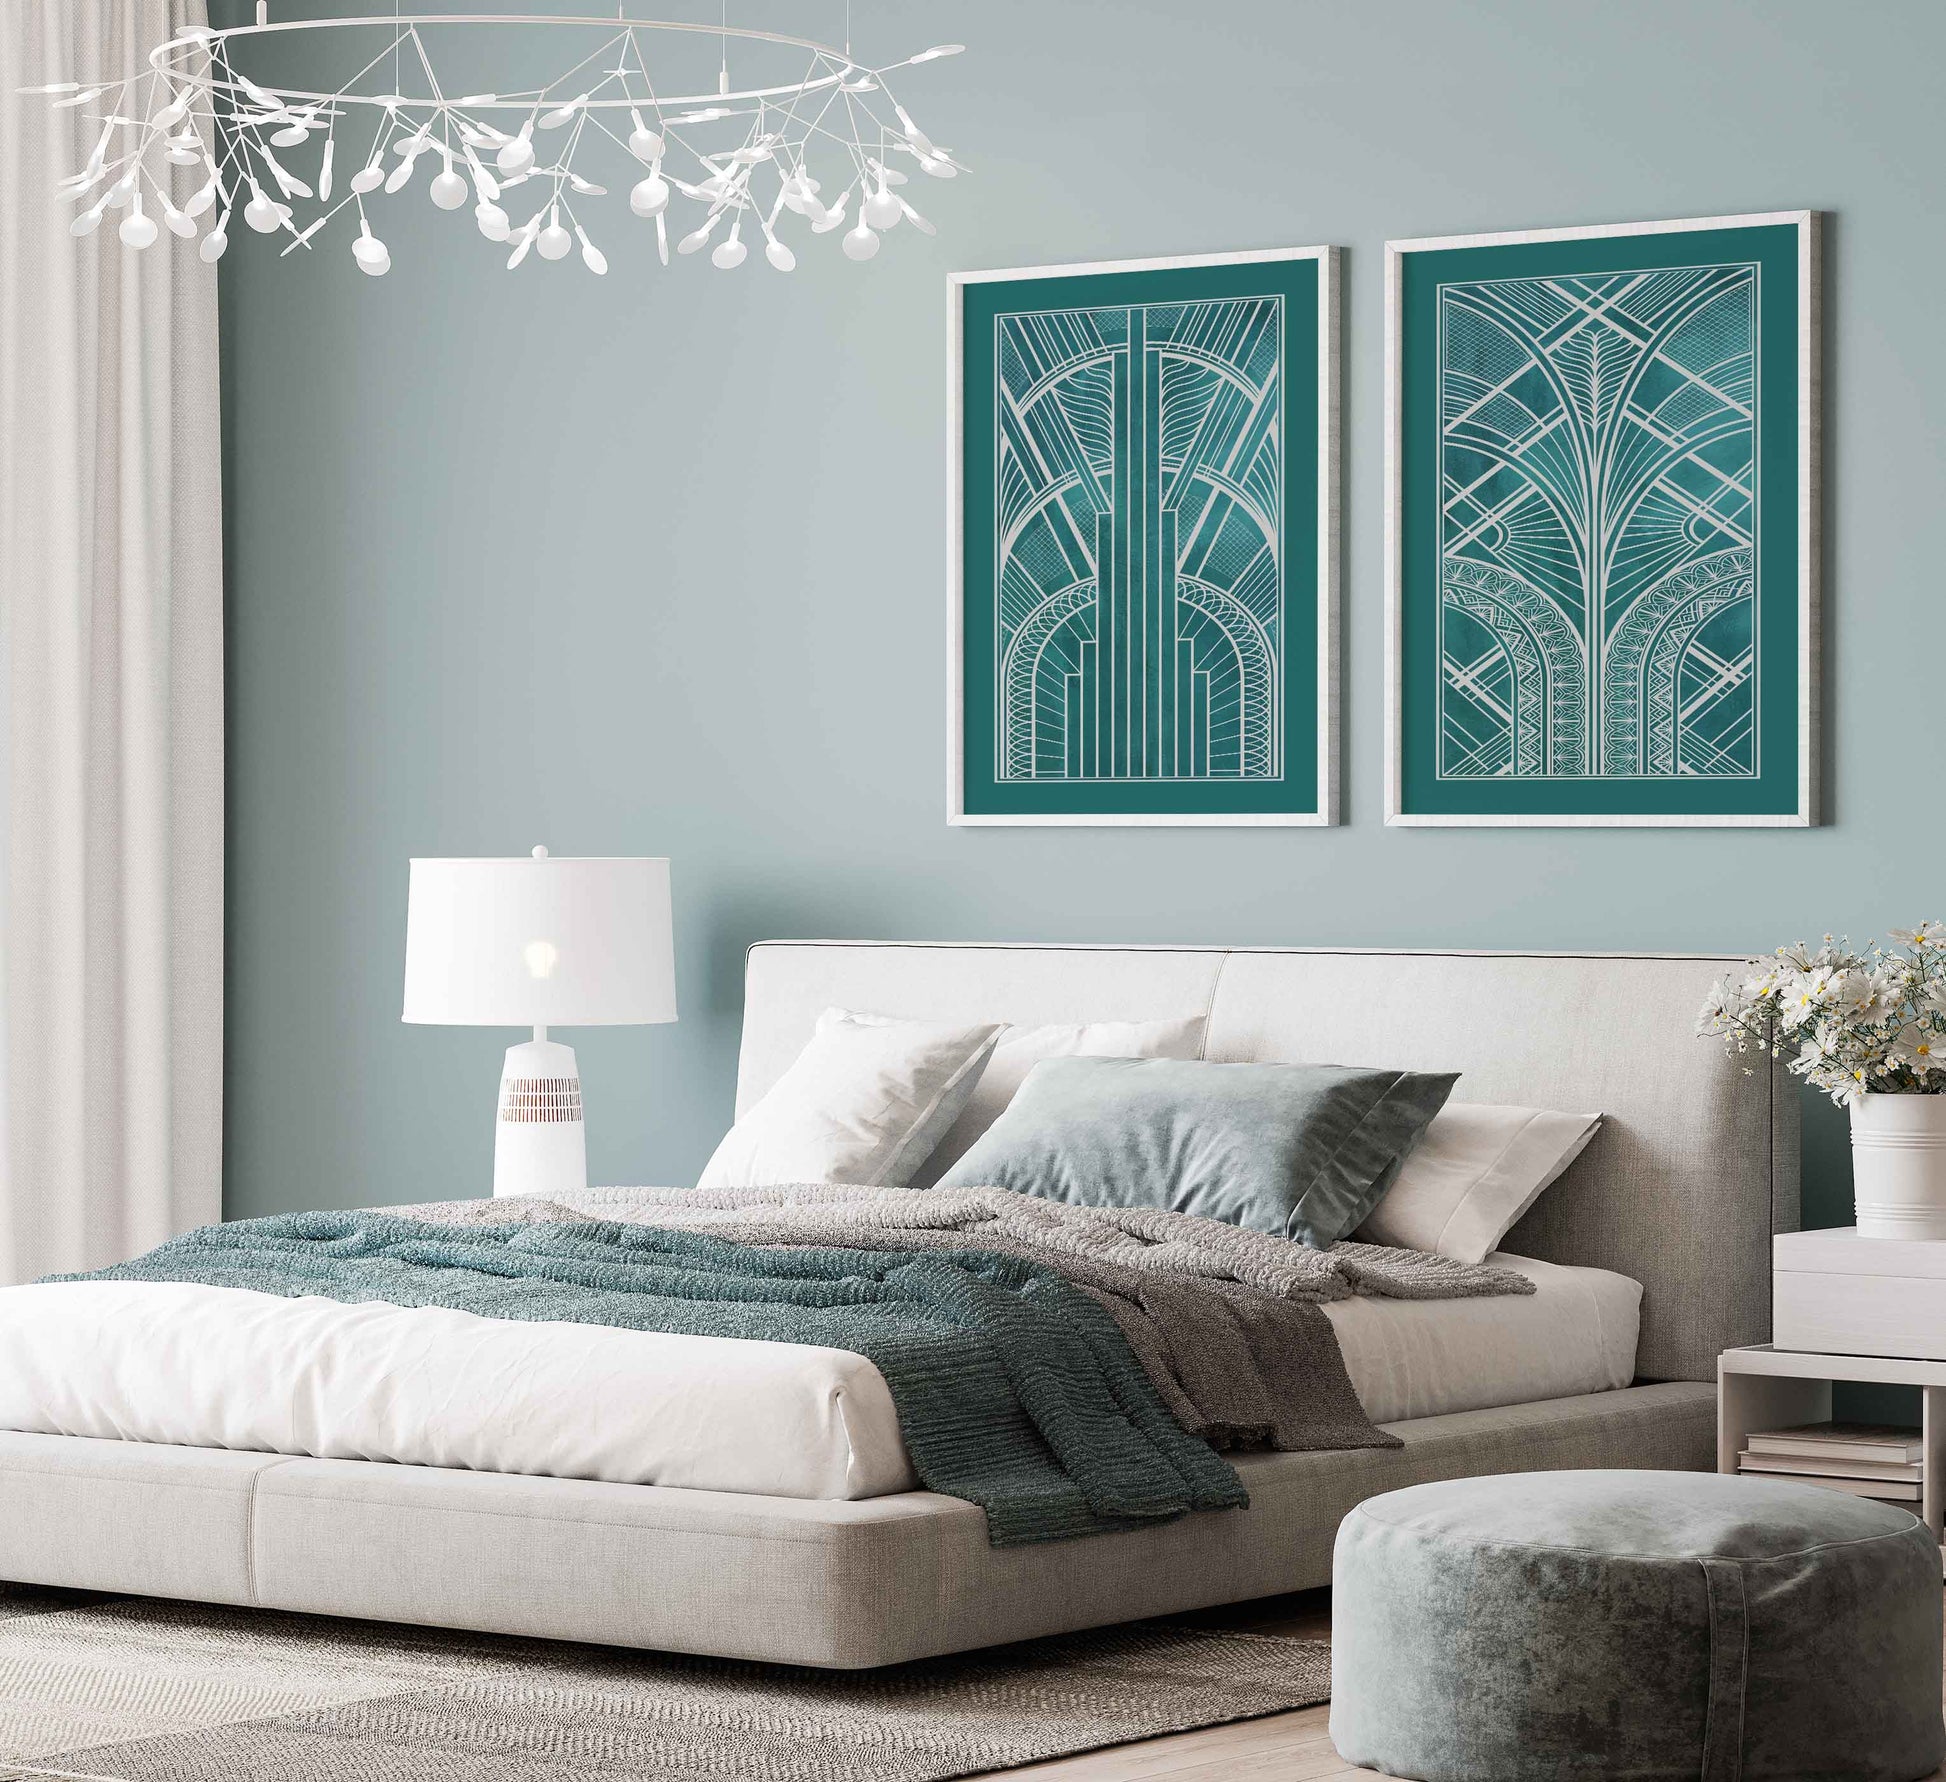 Art deco poster set with geometric patterns in silver and teal, set of 2 prints